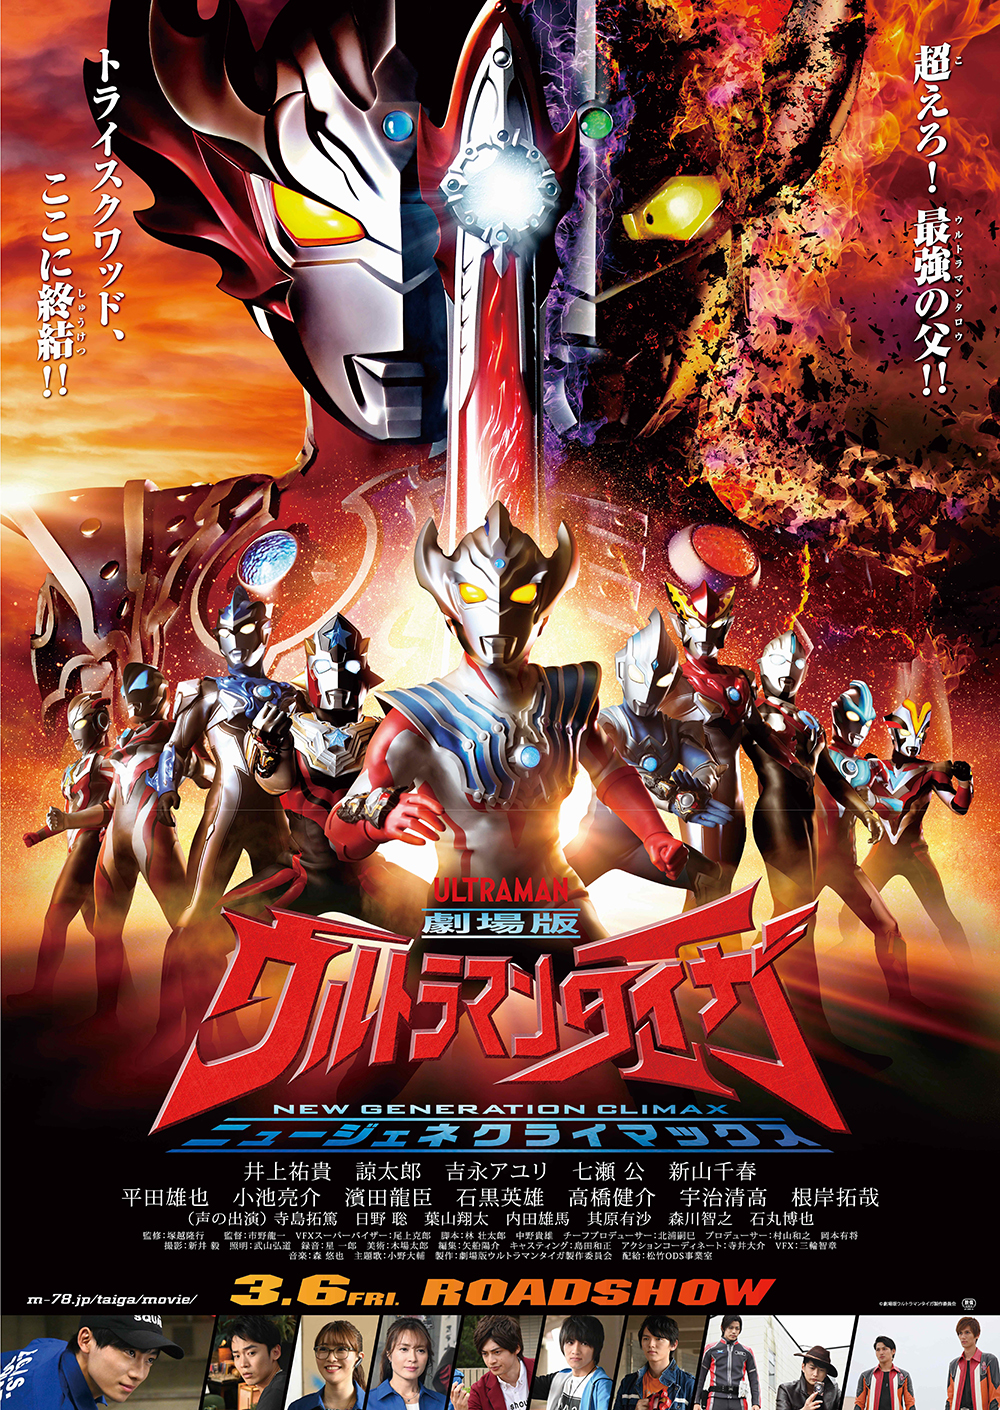 Ultraman Taiga New Generation Climax Movie Announced The